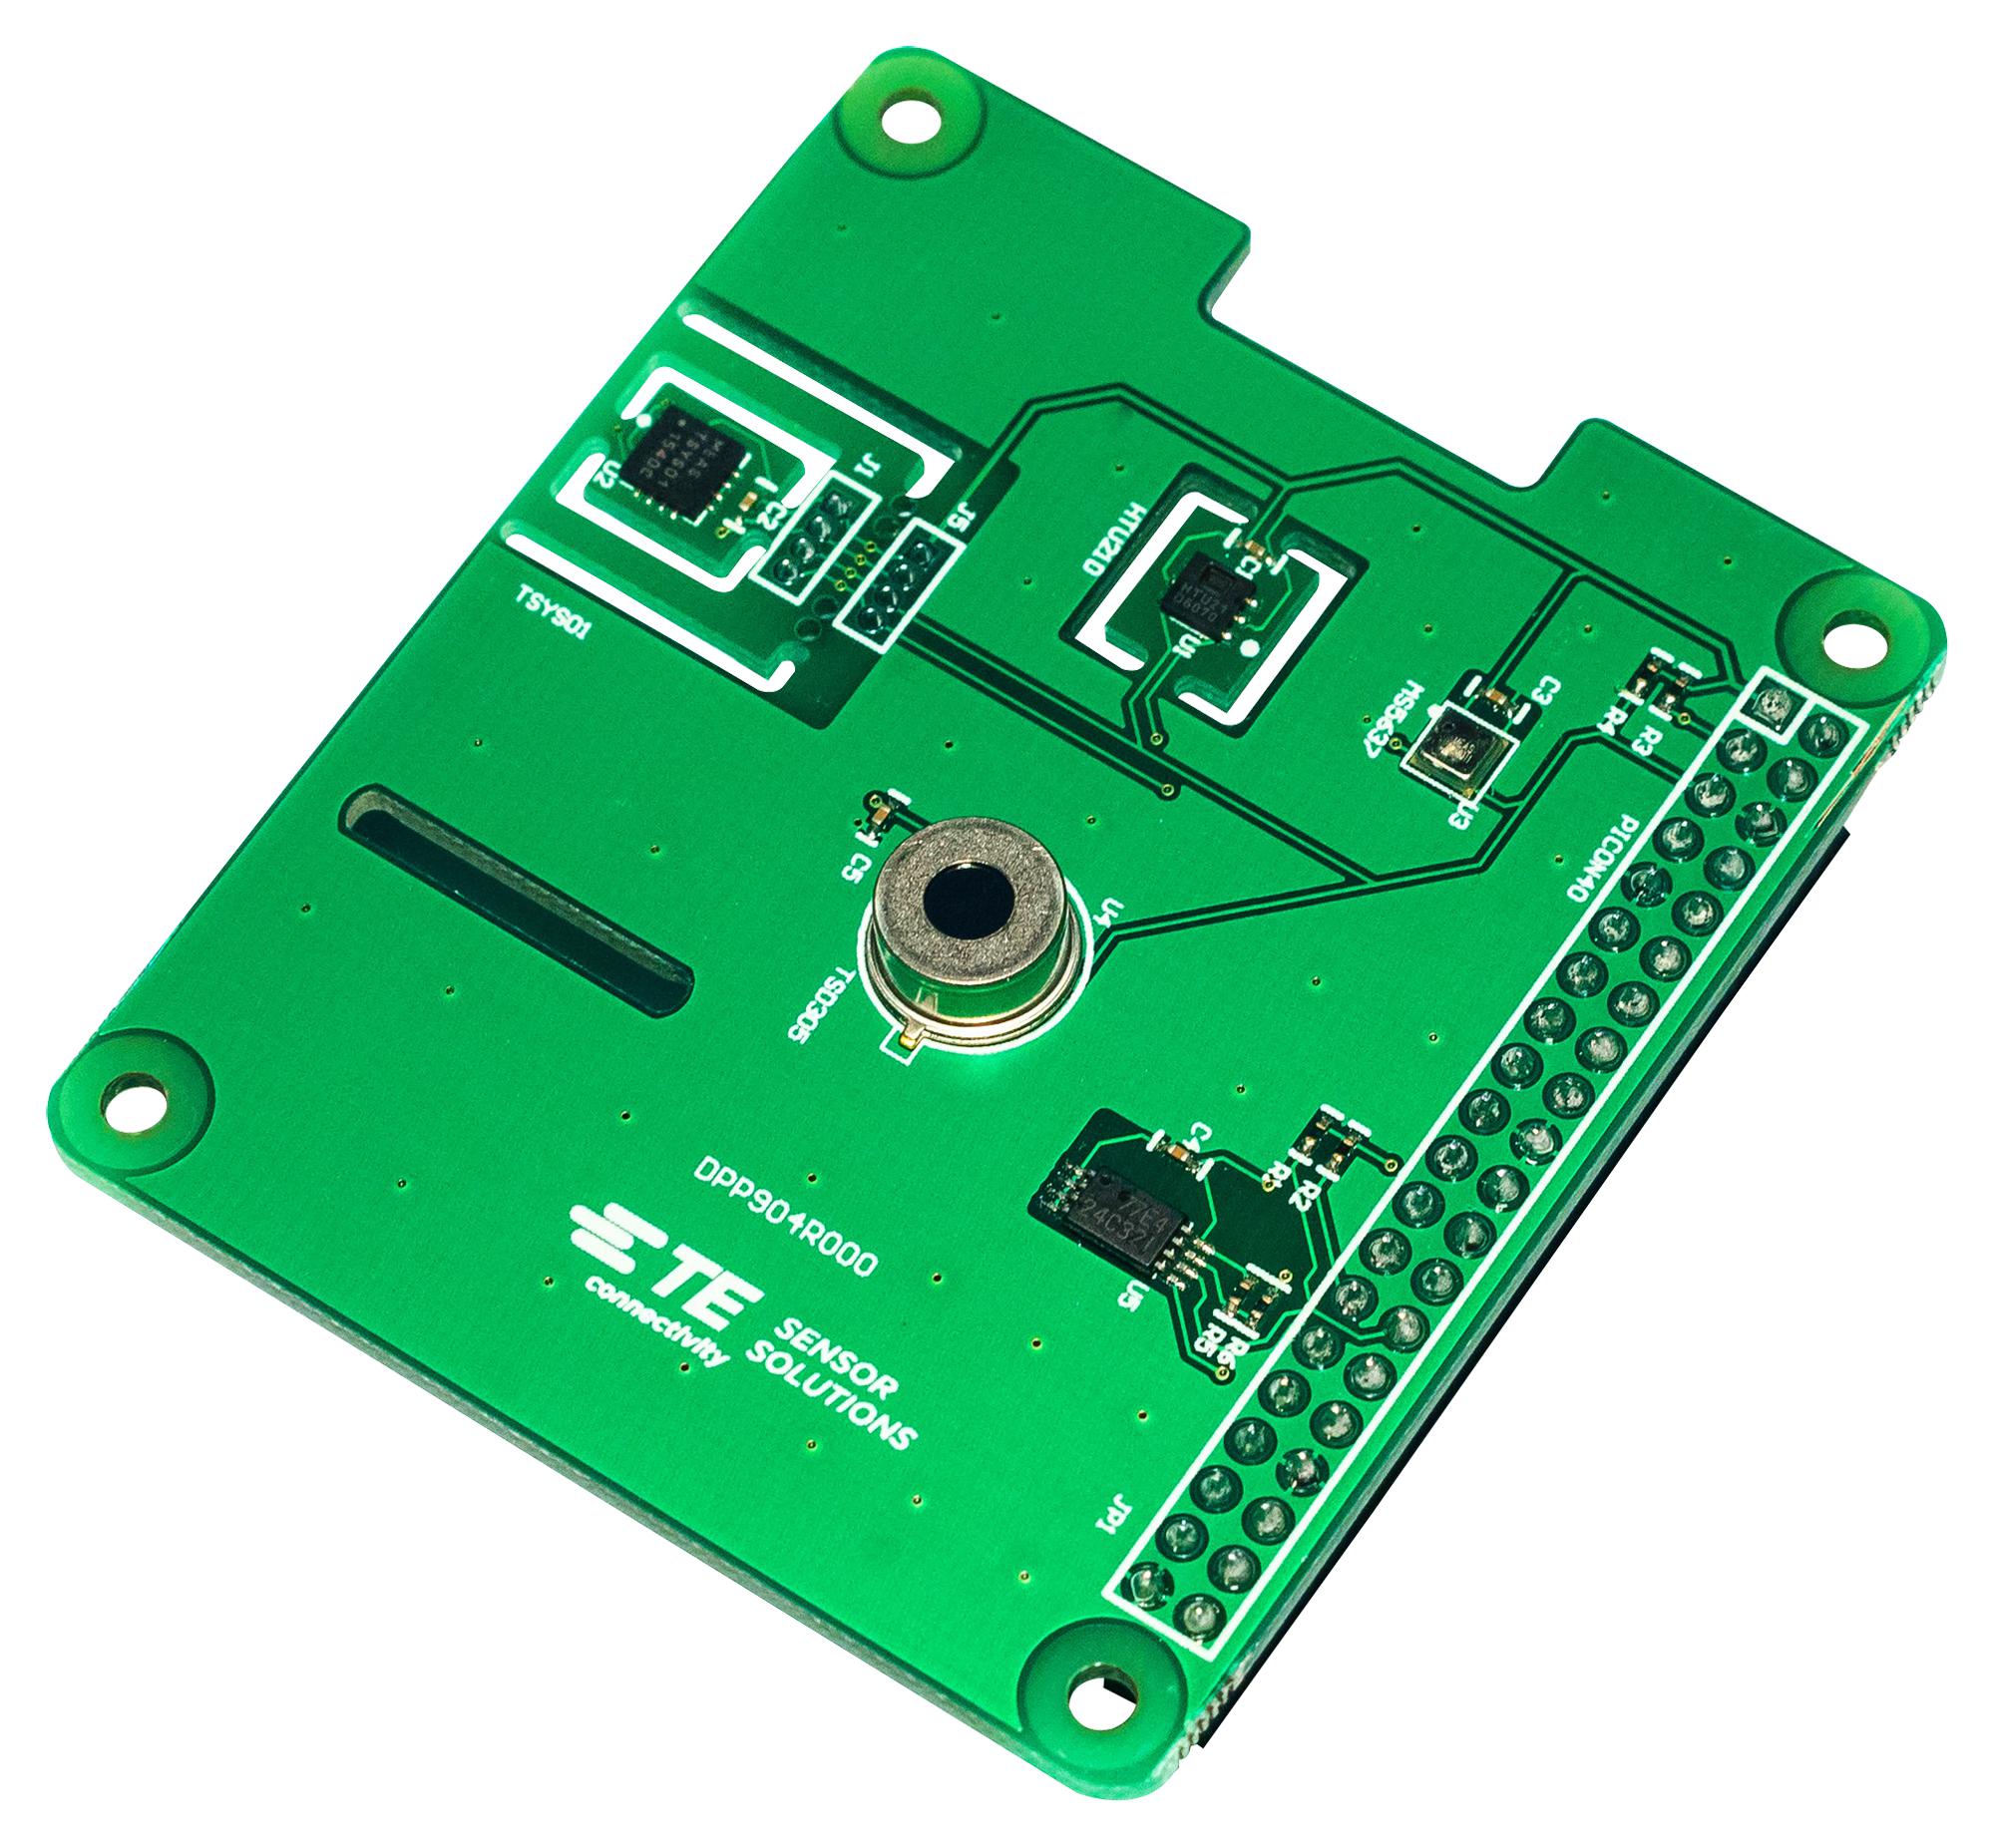 DPP904R000 WEATHER SHIELD BOARD FOR RPI 2 & 3 TE CONNECTIVITY SENSORS